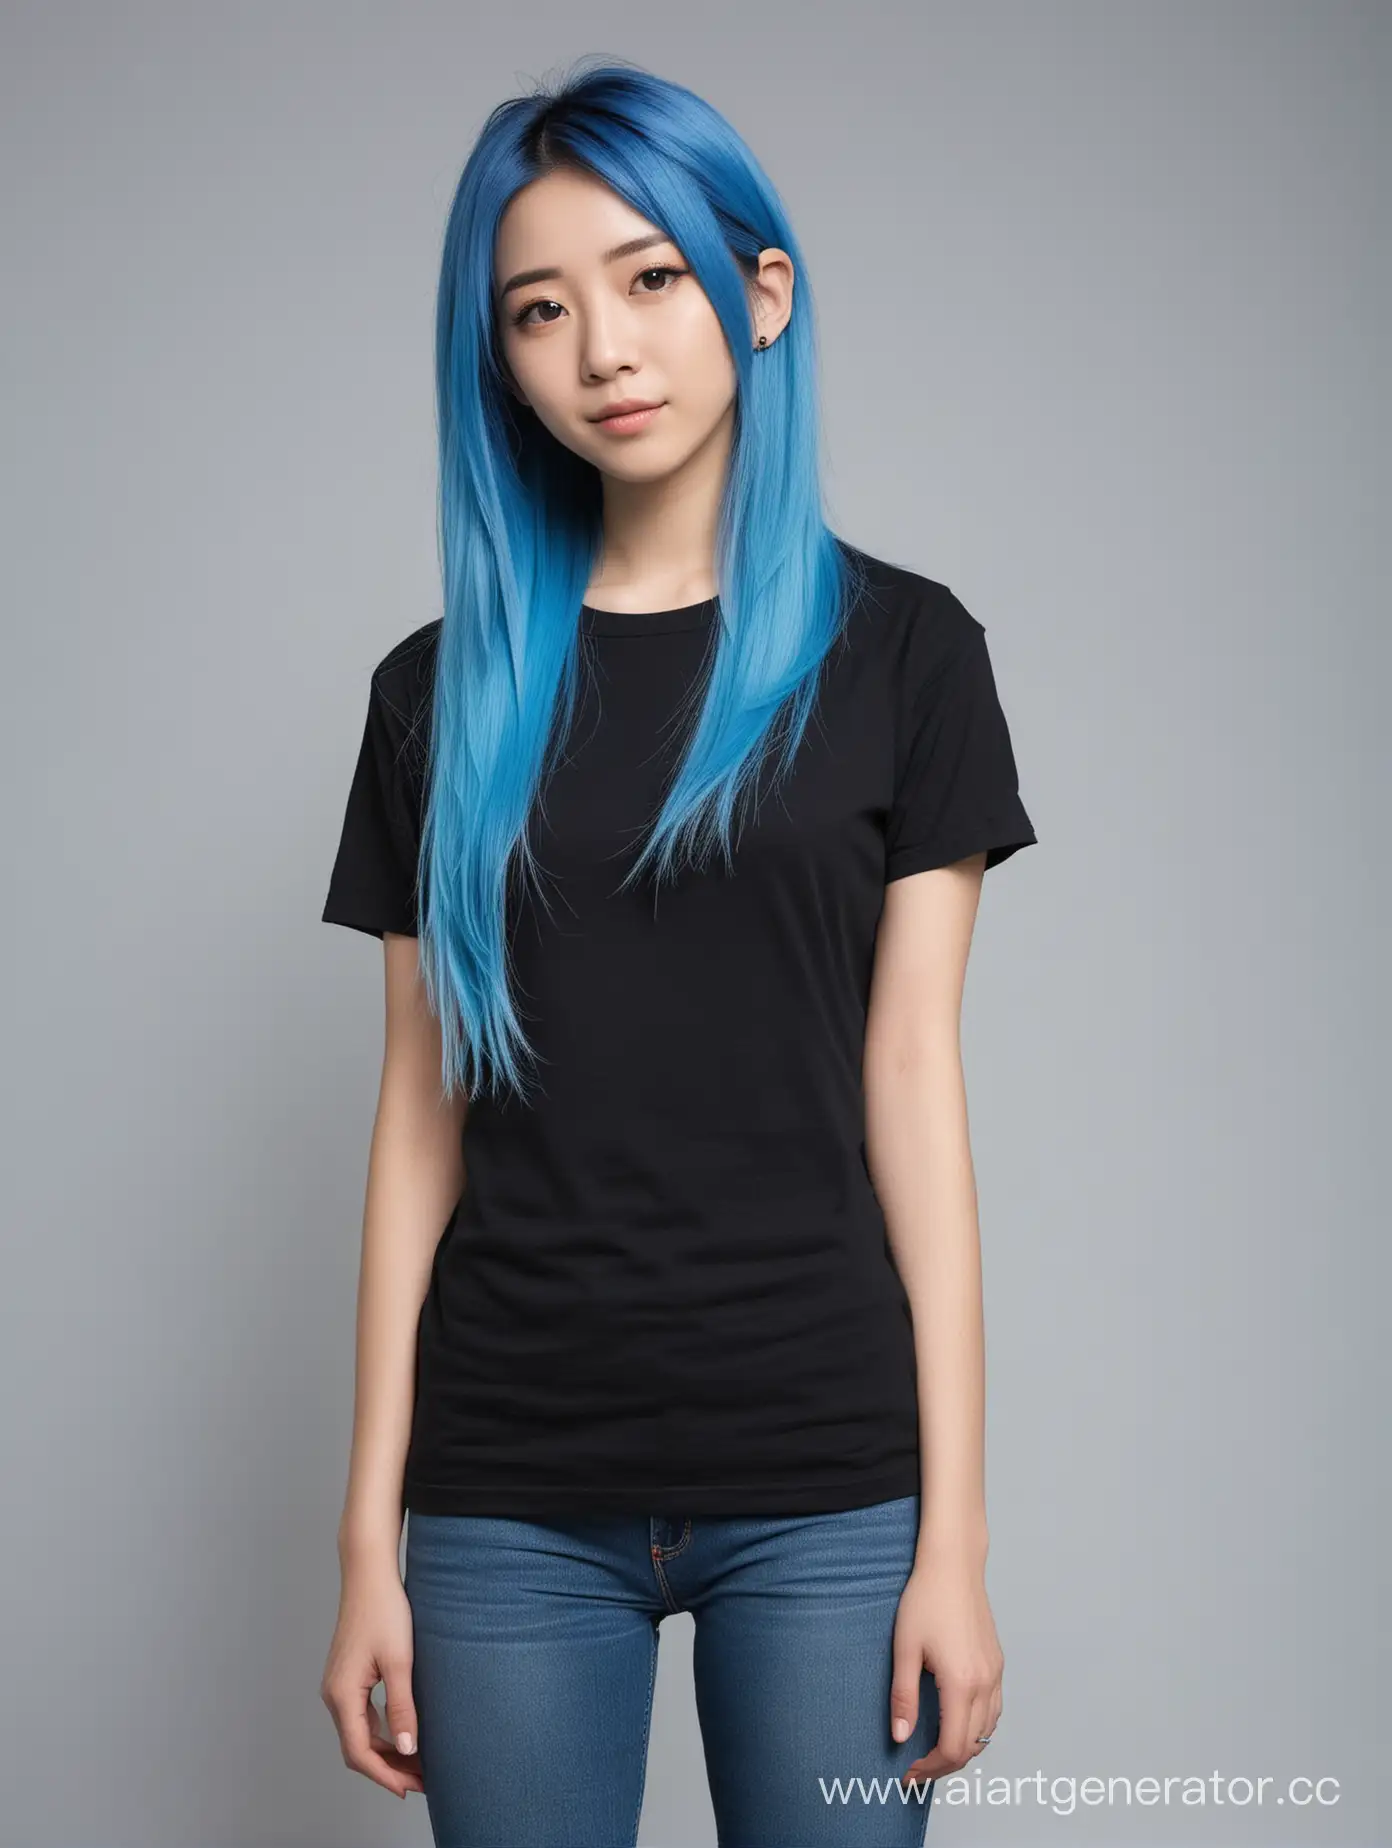 Japanese-Girl-with-Blue-Hair-in-Stylish-Black-TShirt-on-Light-Background